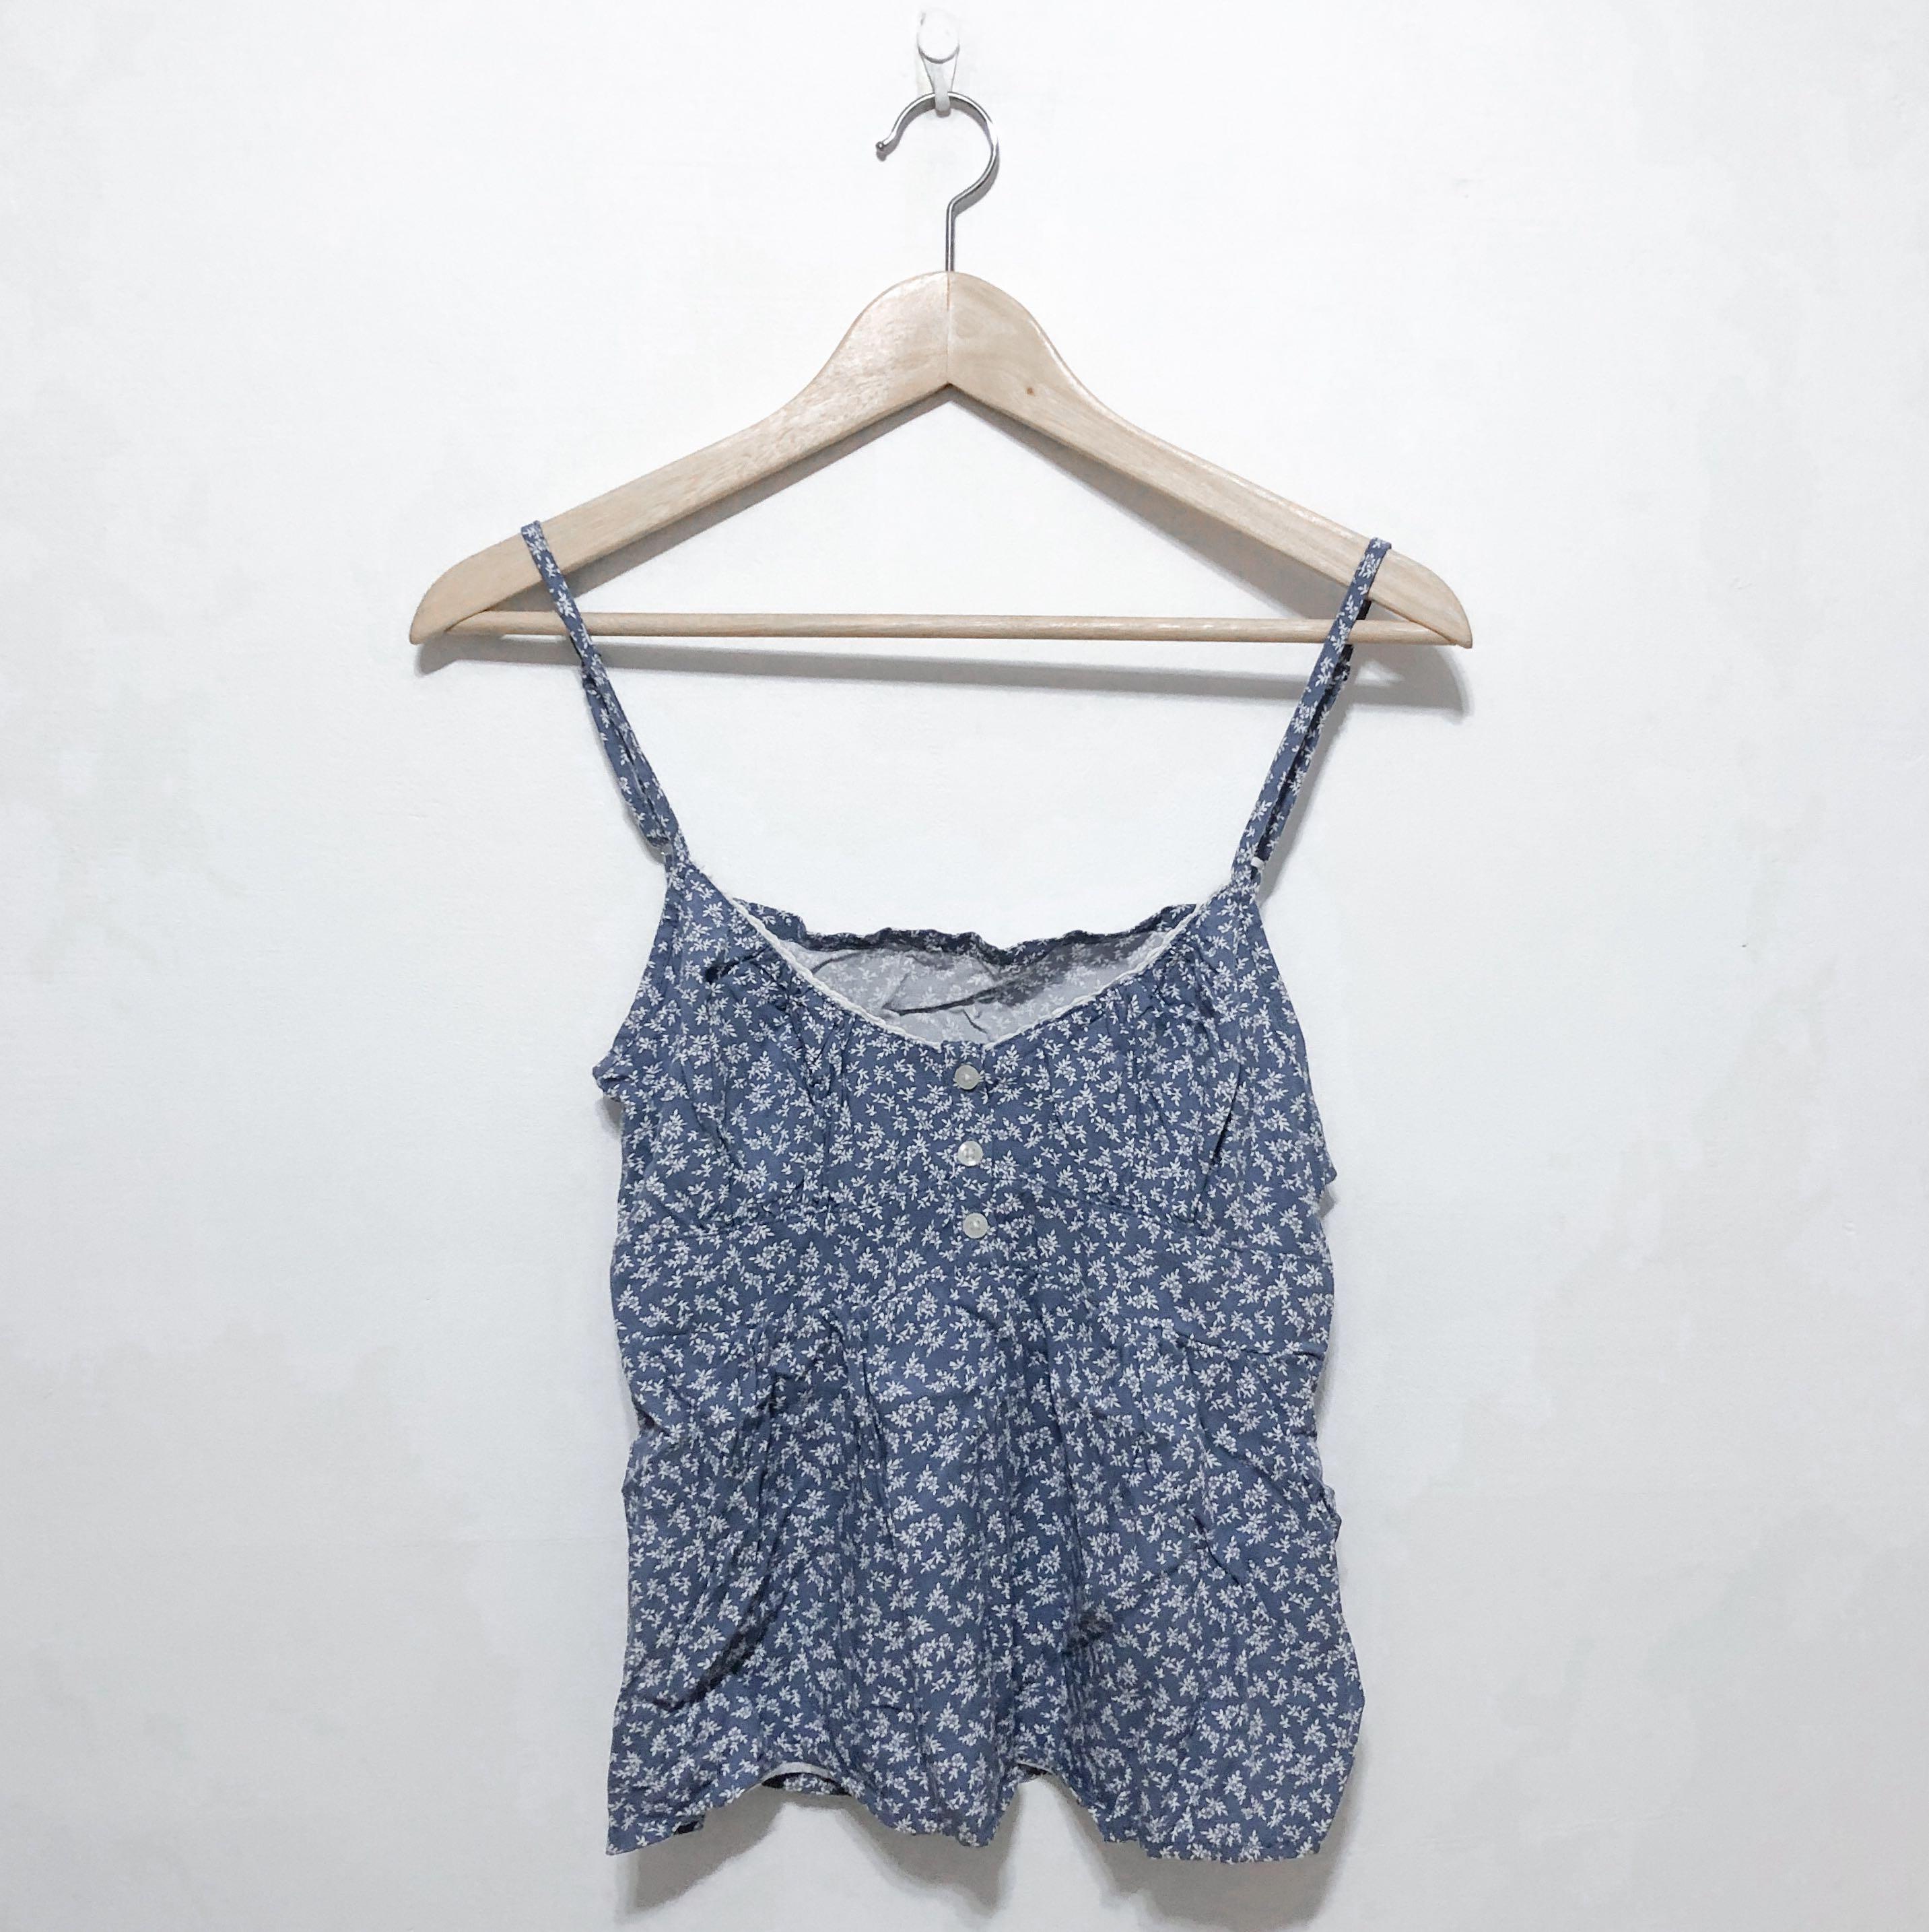 Tiffany Floral Tank  Floral tank outfit, Floral tank, White lace tank top